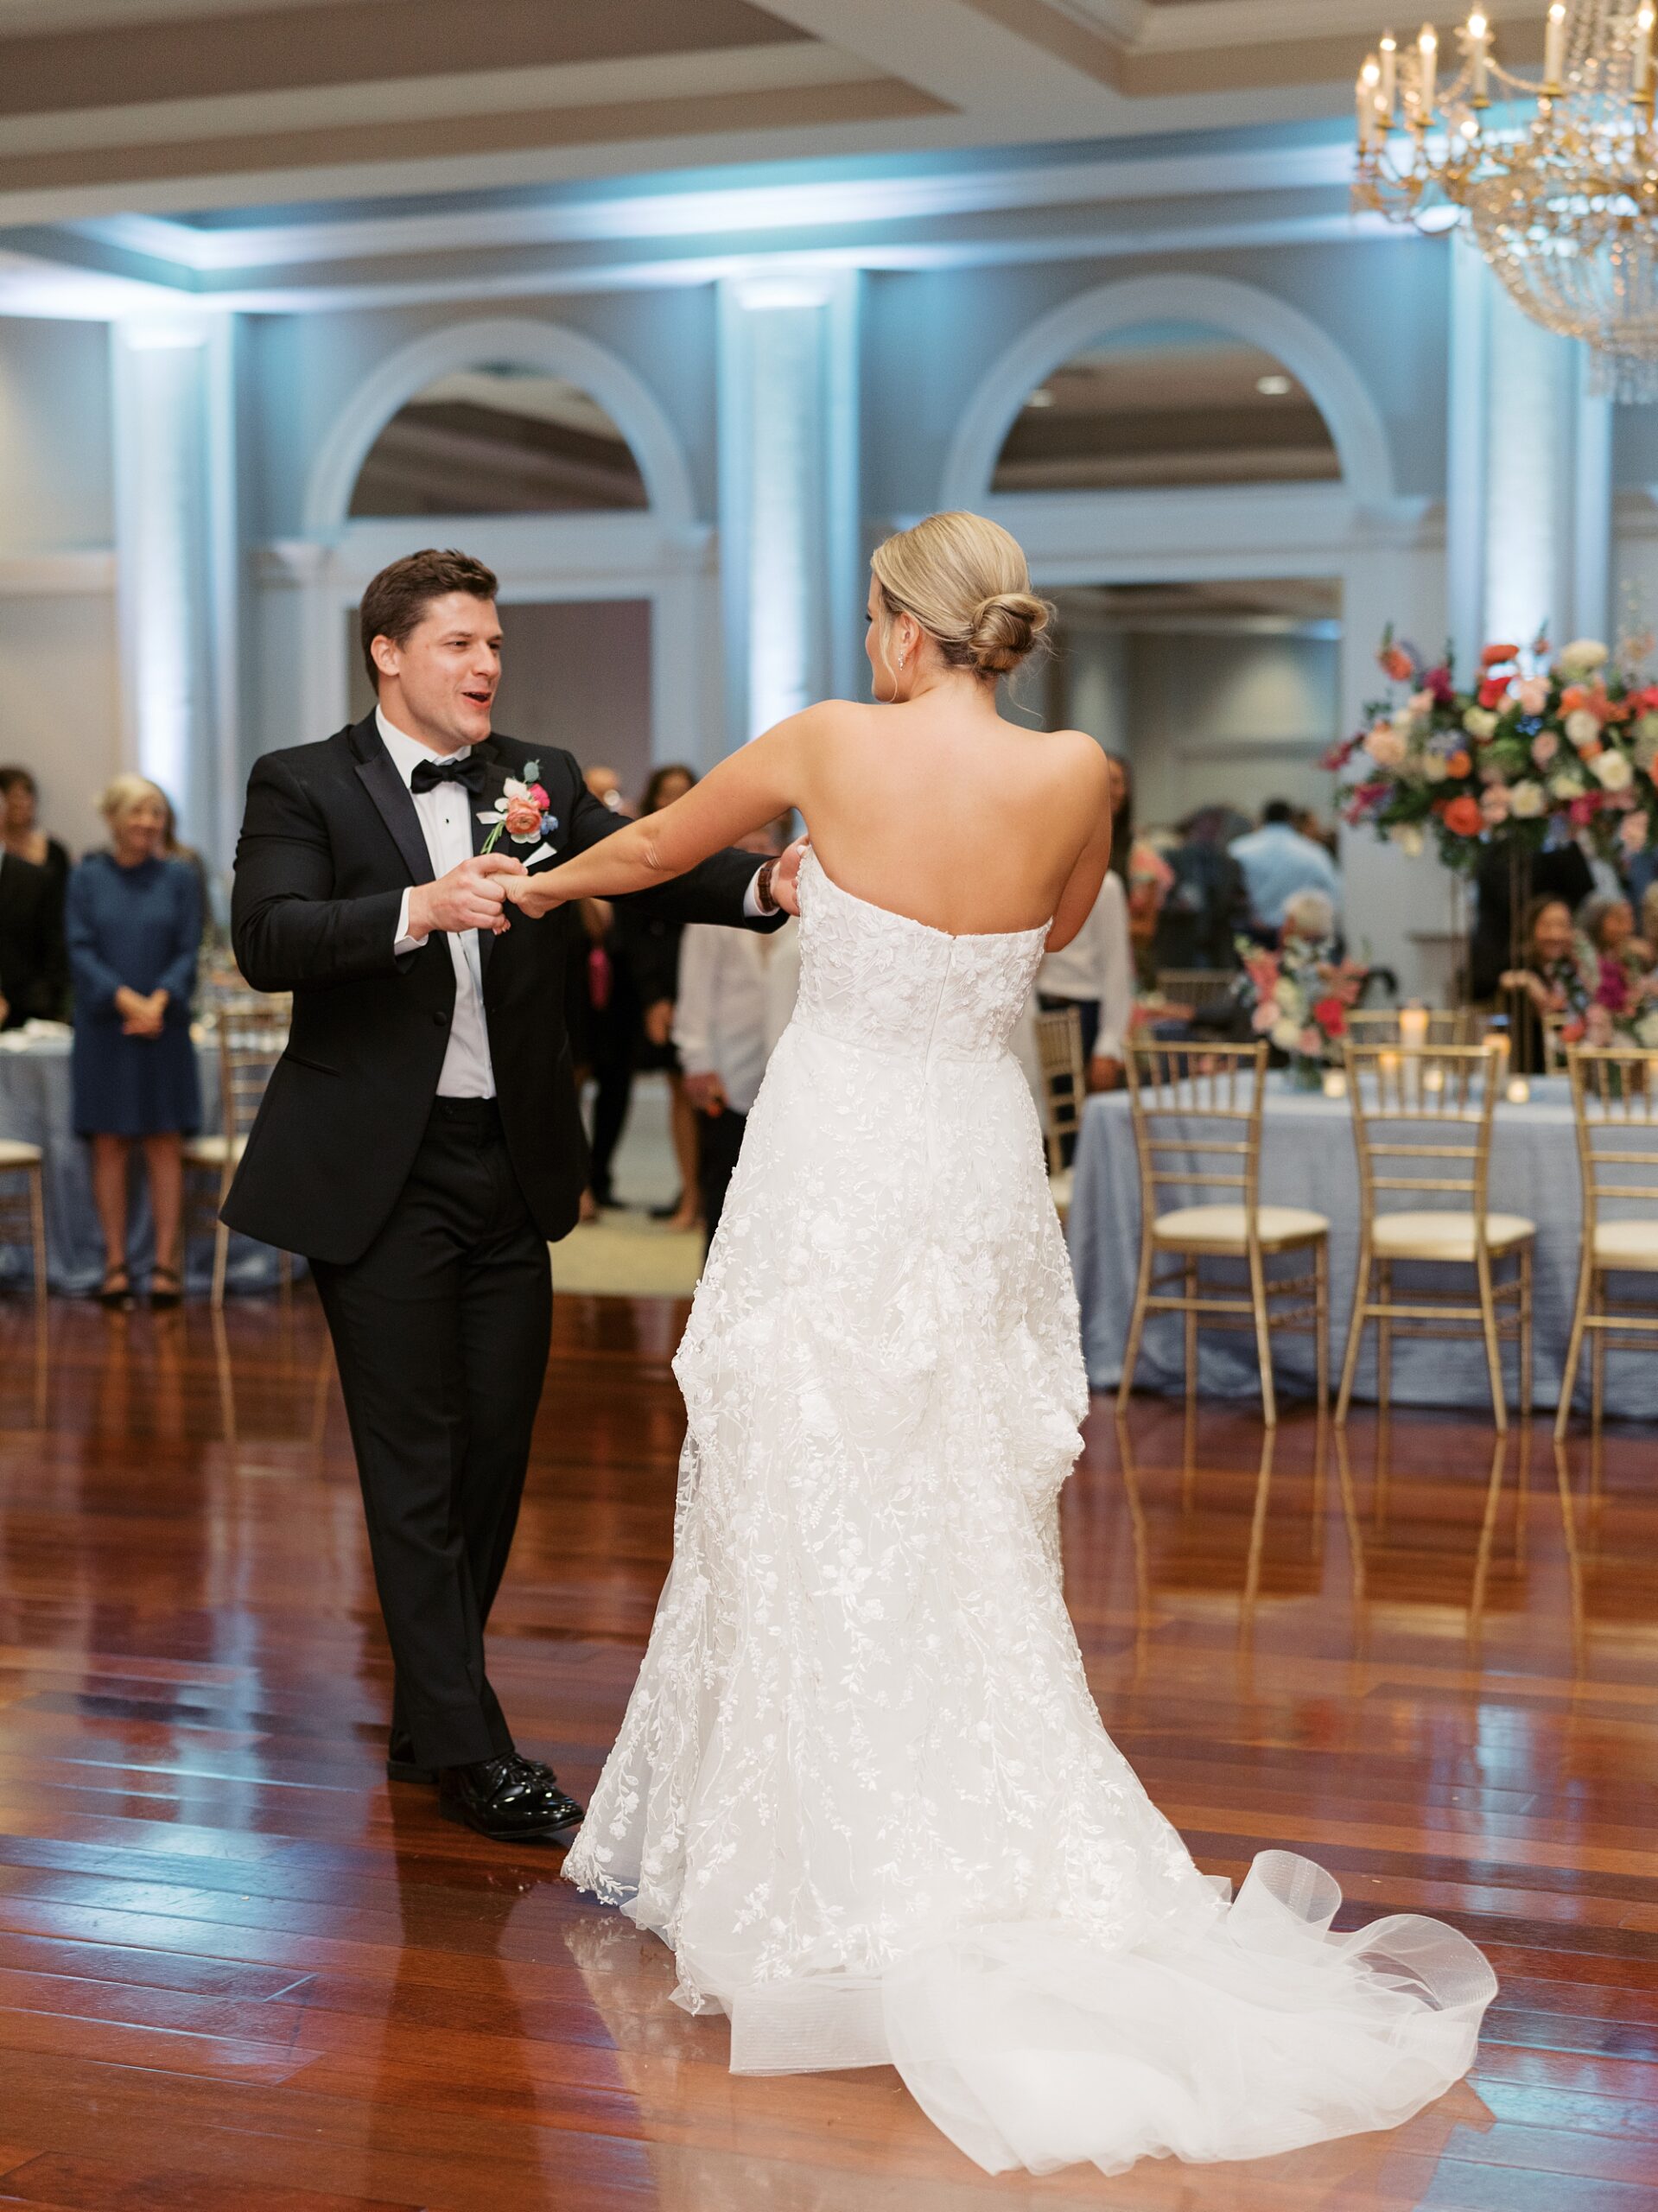 newlyweds dance during reception at Le Pavilion Hotel